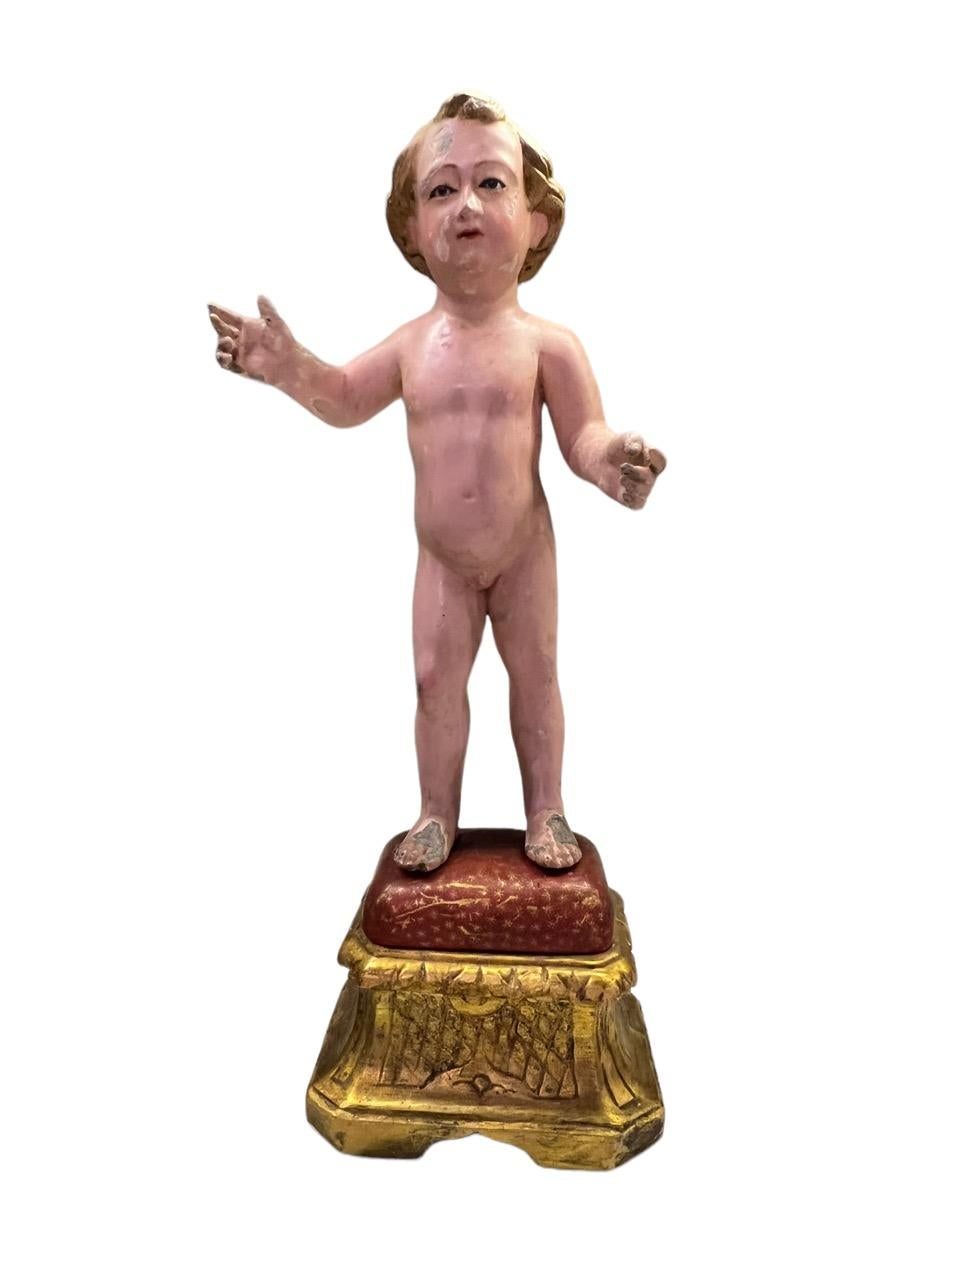 Presenting an extraordinary 18th-century Italian carved wood and polychromed figure, capturing the tender image of baby Jesus in a standing posture, gracefully perched upon an intricate foliate pillow and pedestal. This exquisite piece is not only a